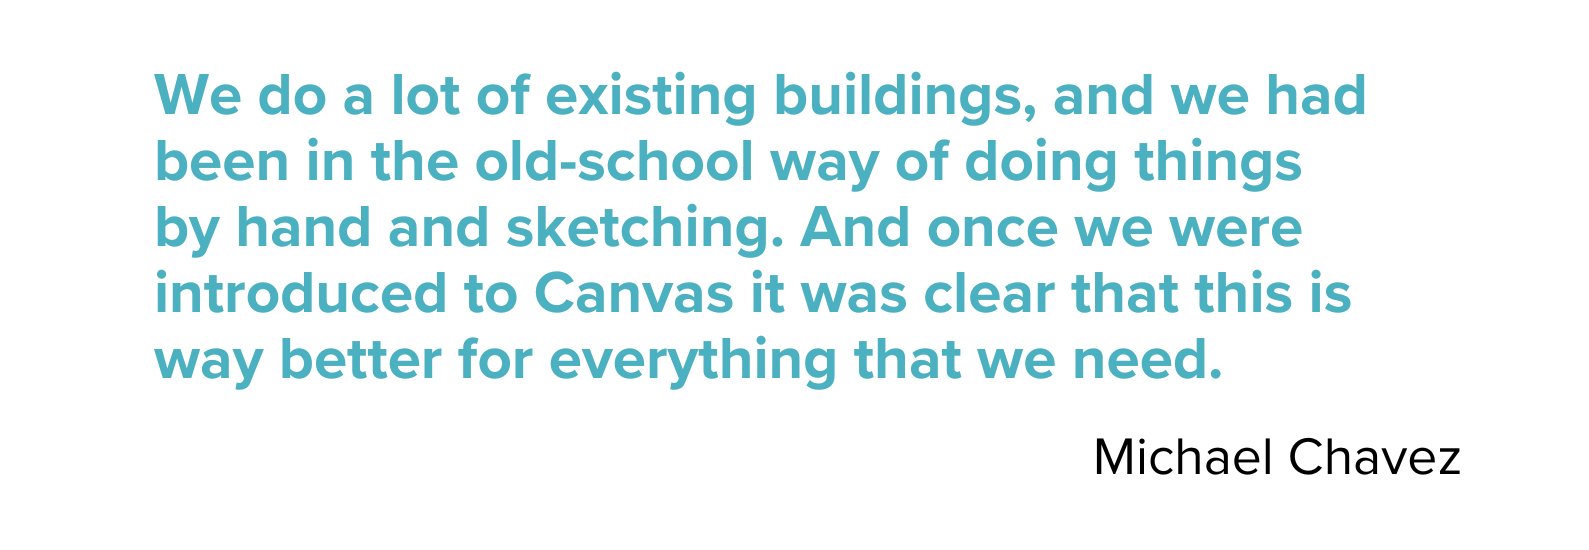 "We do a lot of existing buildings, and we had been in the old-school way of doing things by hand and sketching. And once we were introduced to Canvas it was clear that this is way better for everything we need. - Michael Chavez